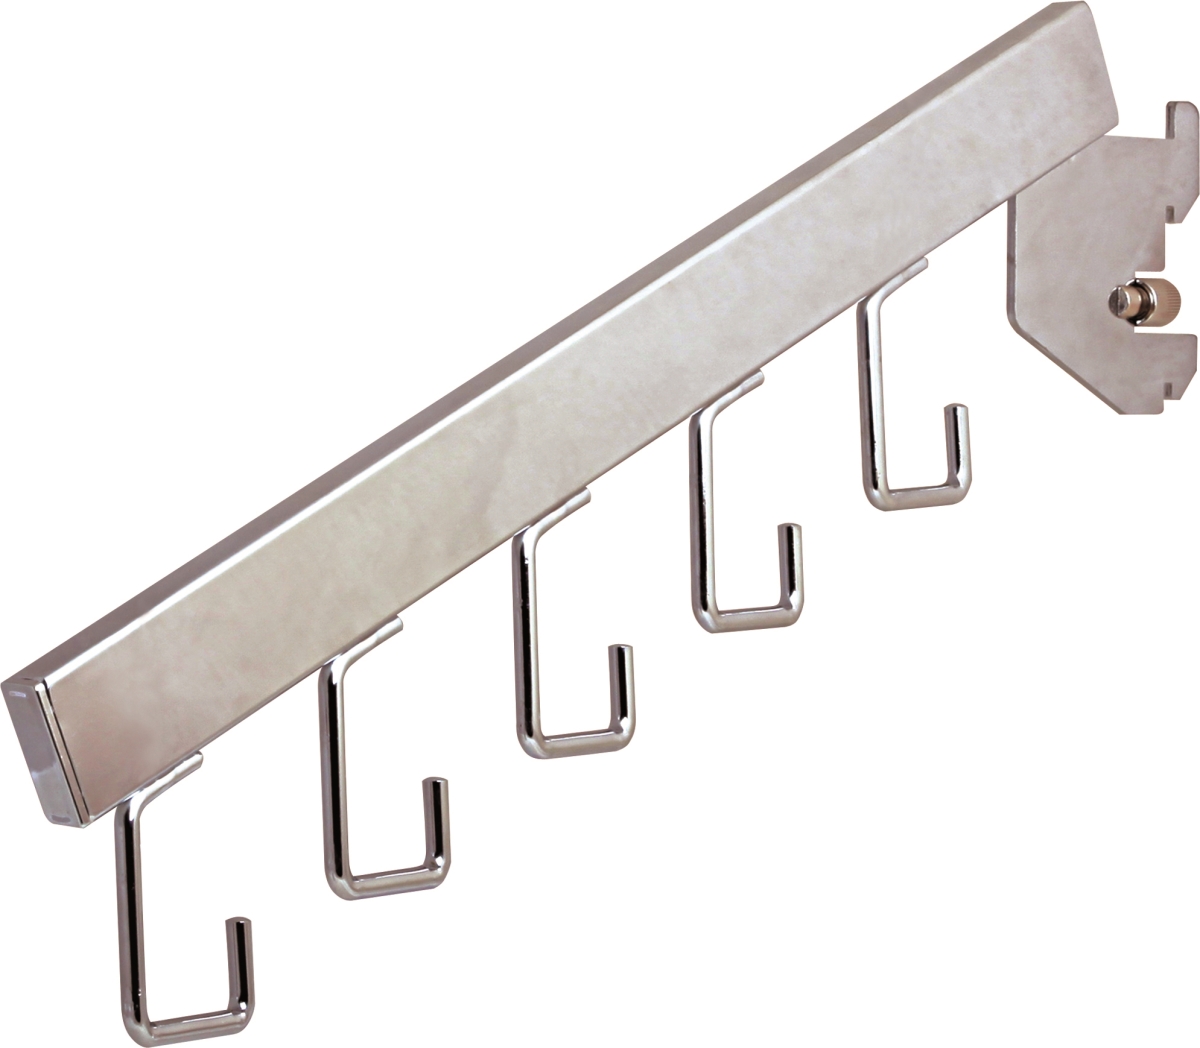 Rr-5h-ch 5-hook Waterfall For 1 In. Slot On 2 In. Center, Chrome